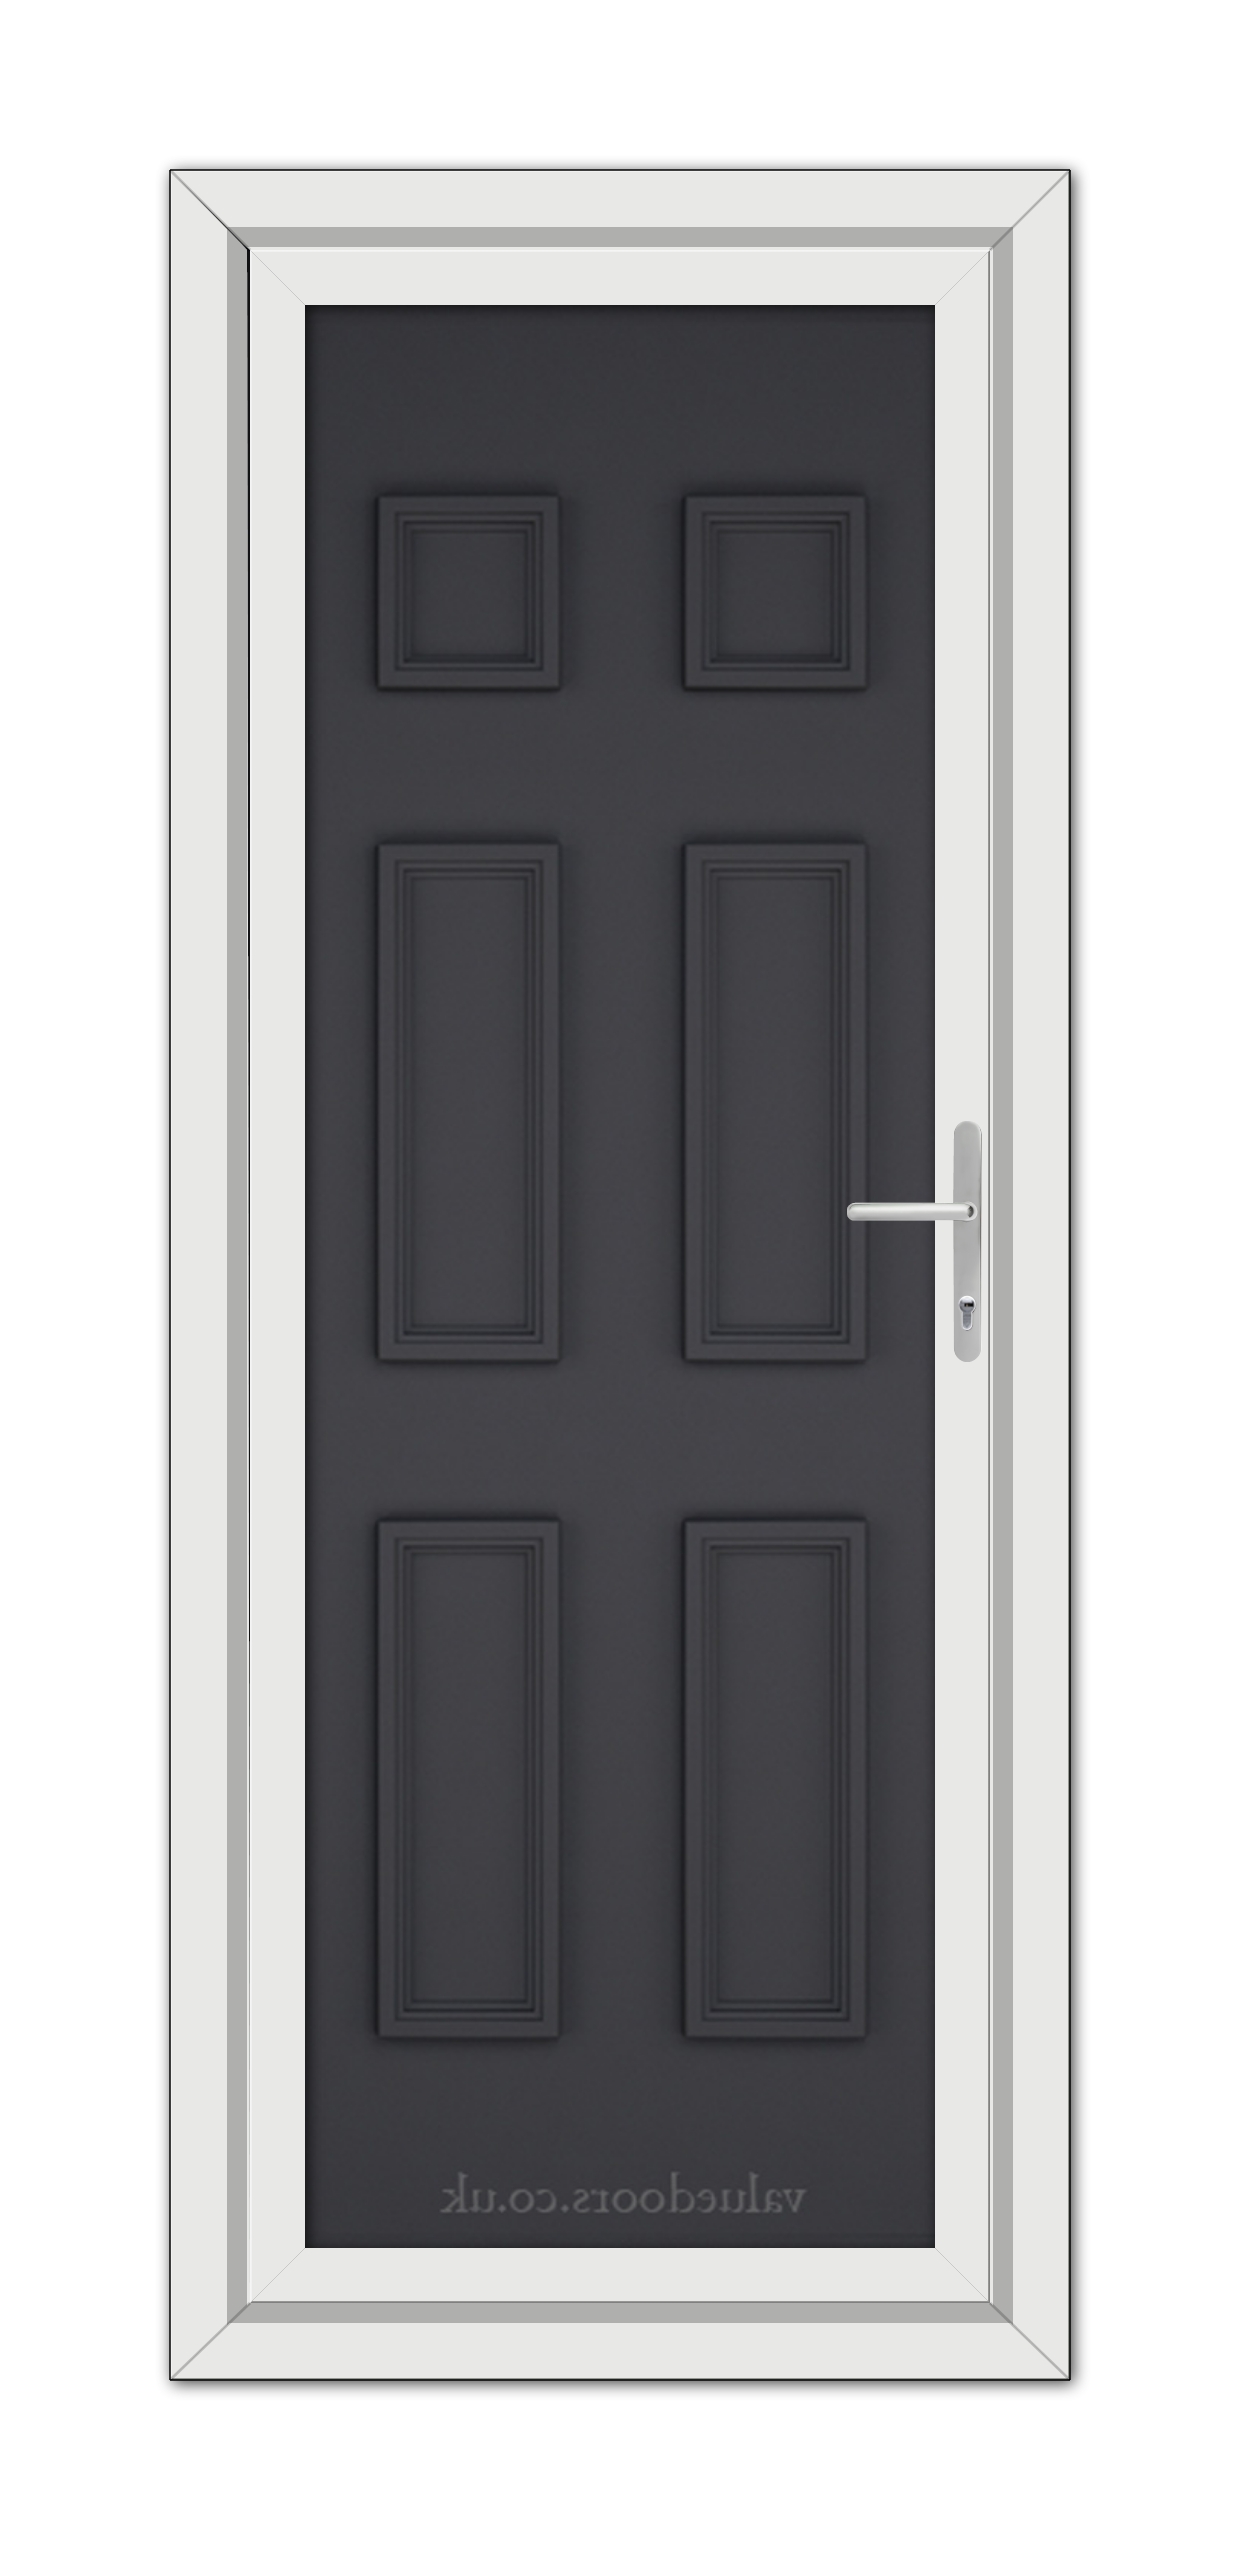 A modern grey Windsor solid uPVC door with a silver handle, set within a white door frame.